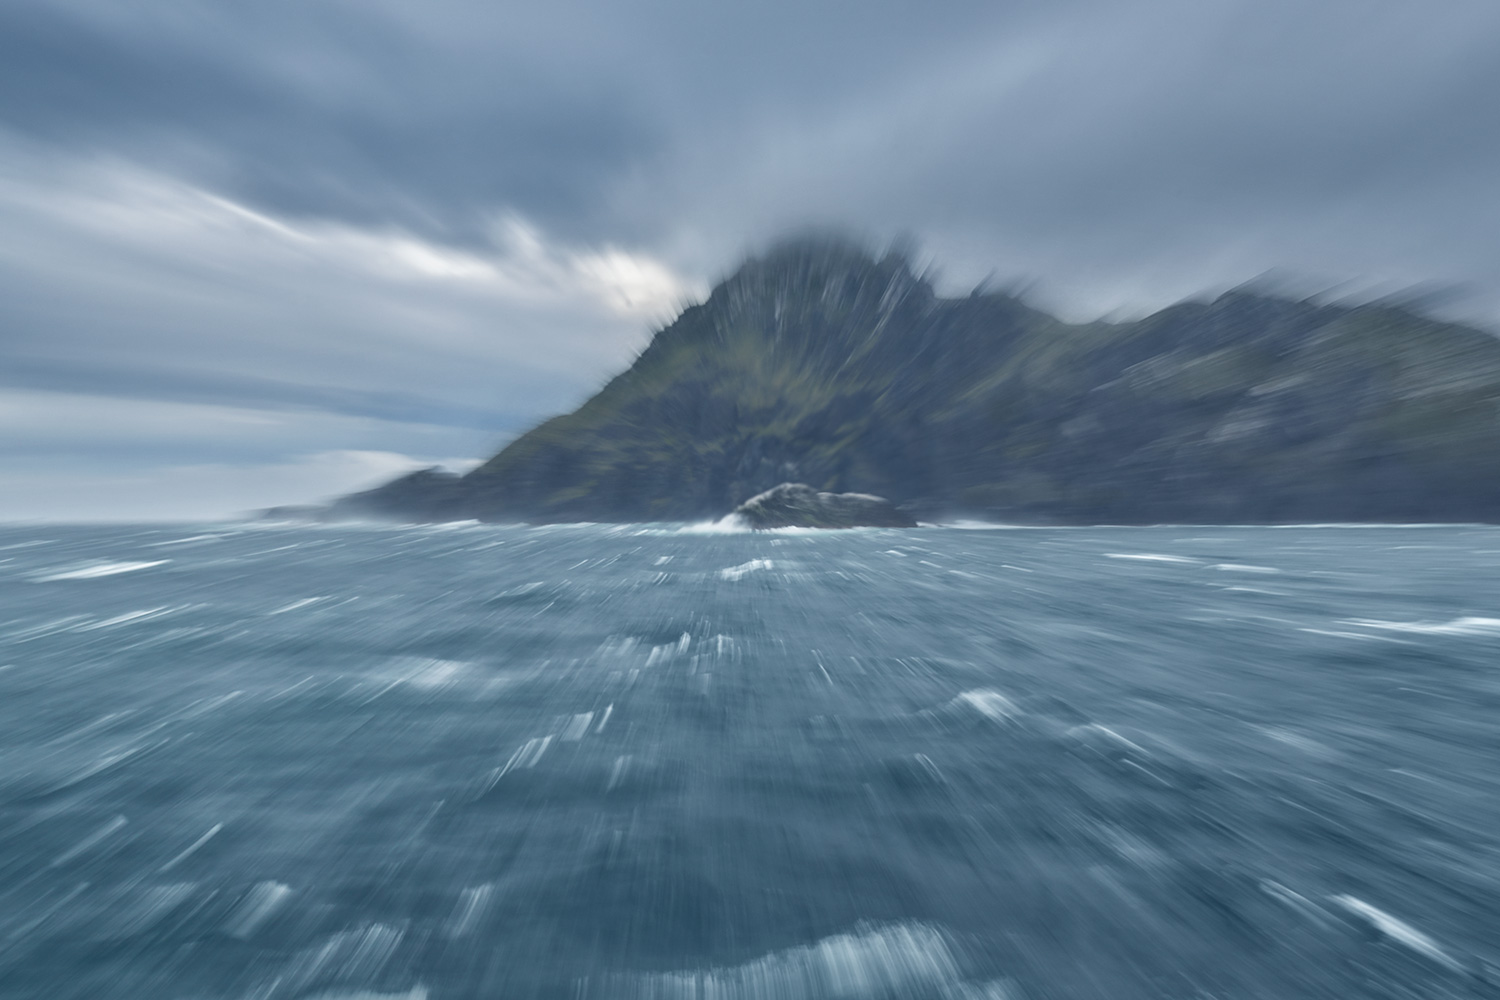 Cape Horn
giclee print on archival paper, limited edition of 7
60 x 90 cm